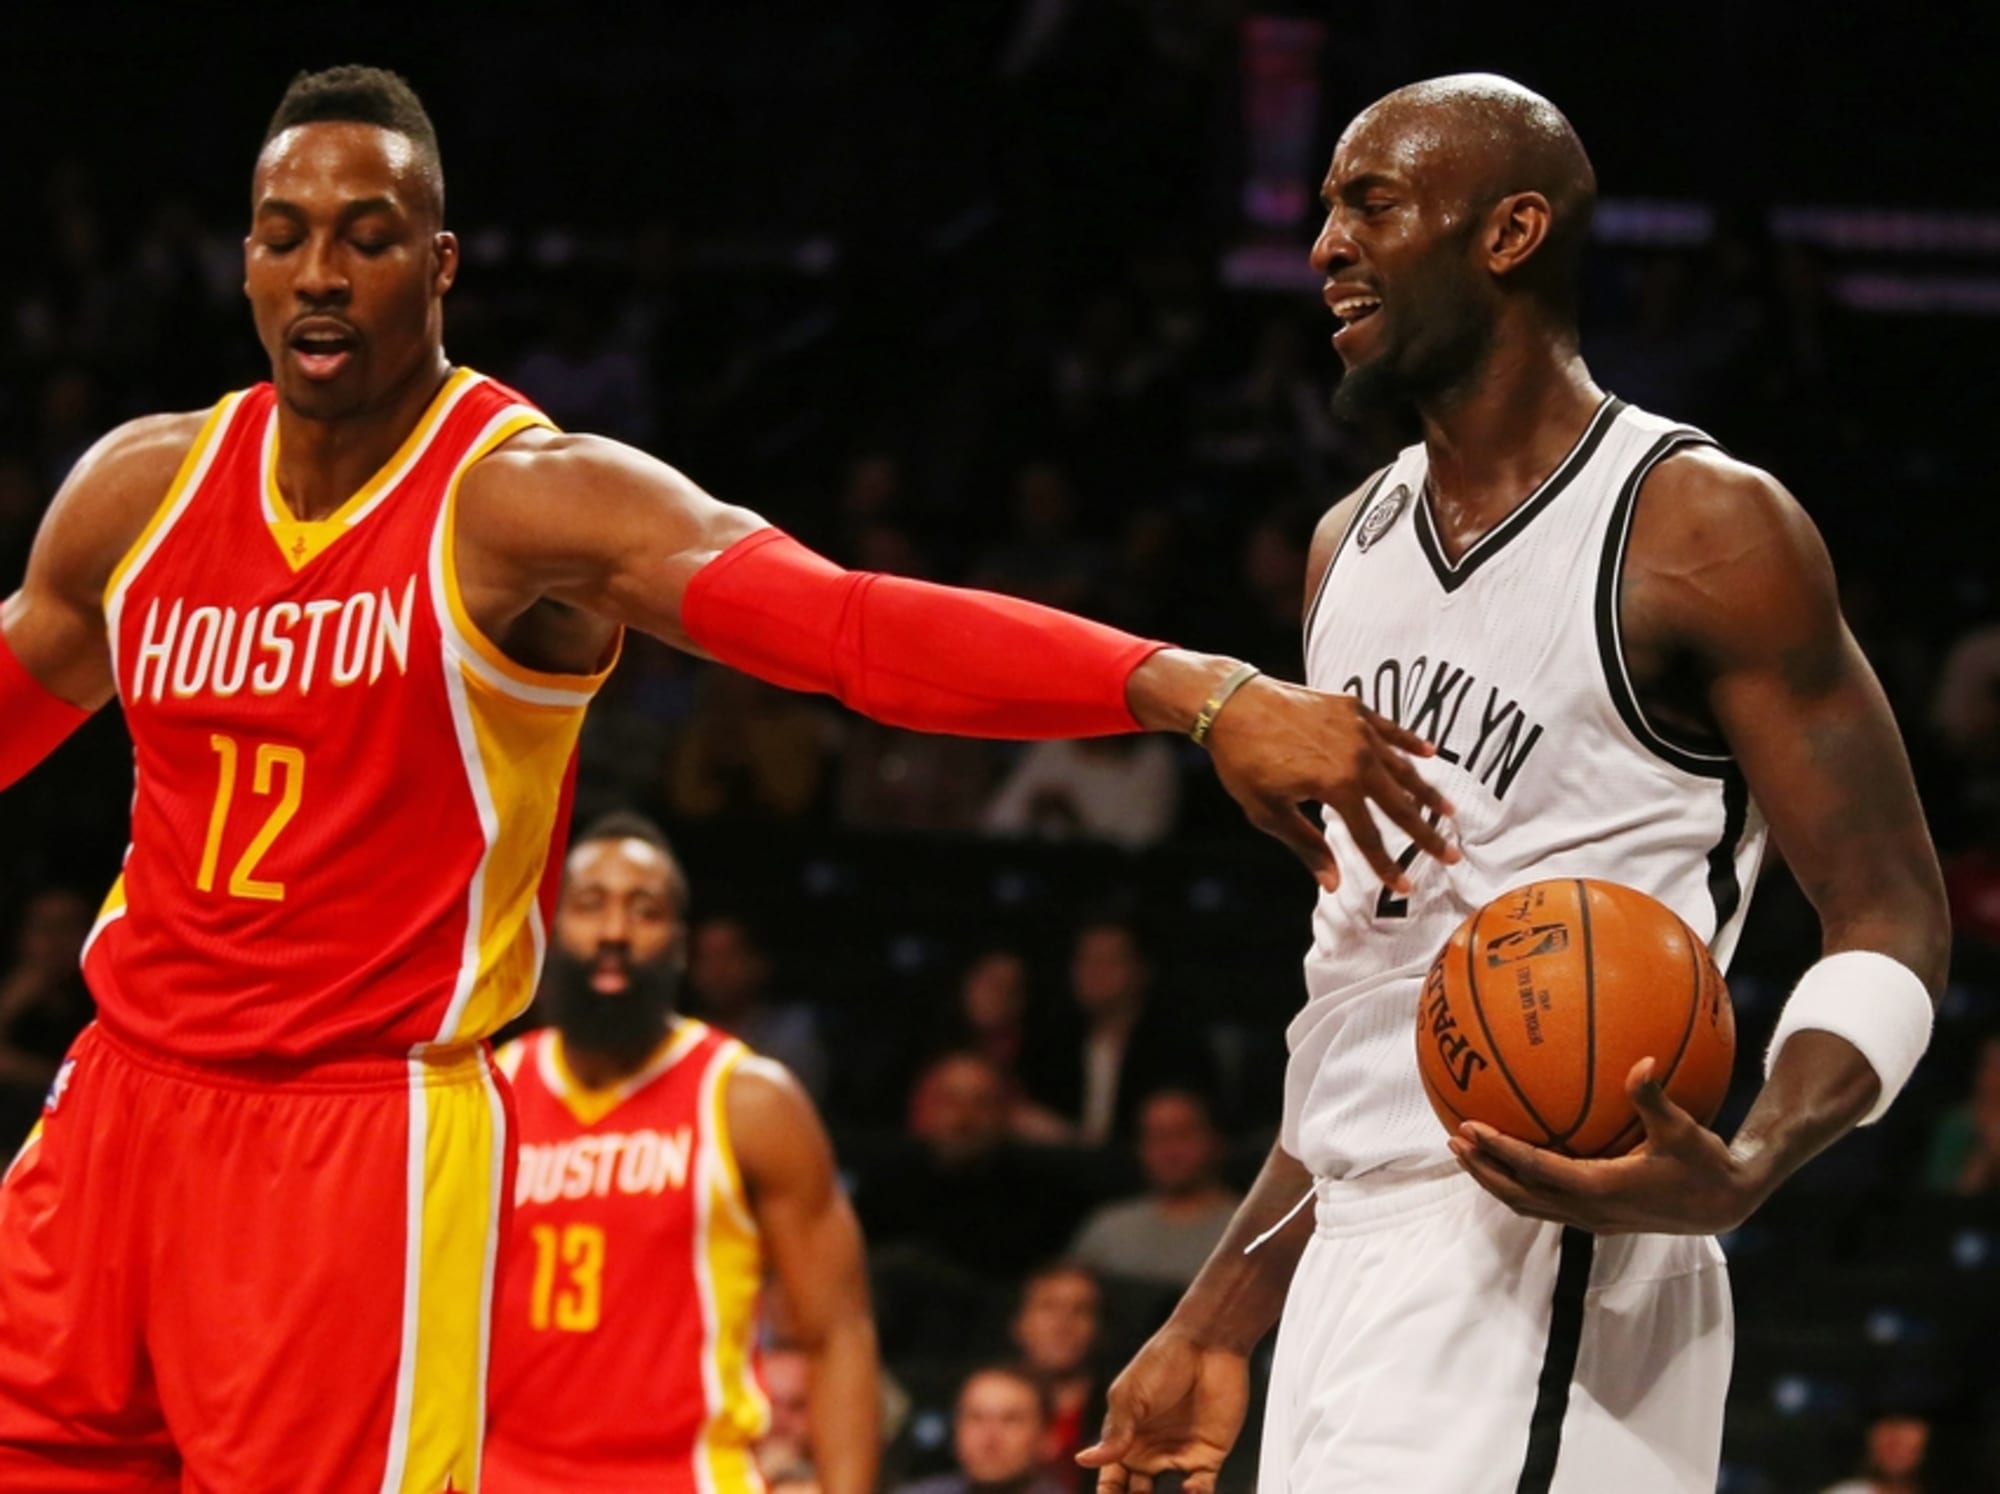 Kevin Garnett Has Hated Dwight Howard For Years